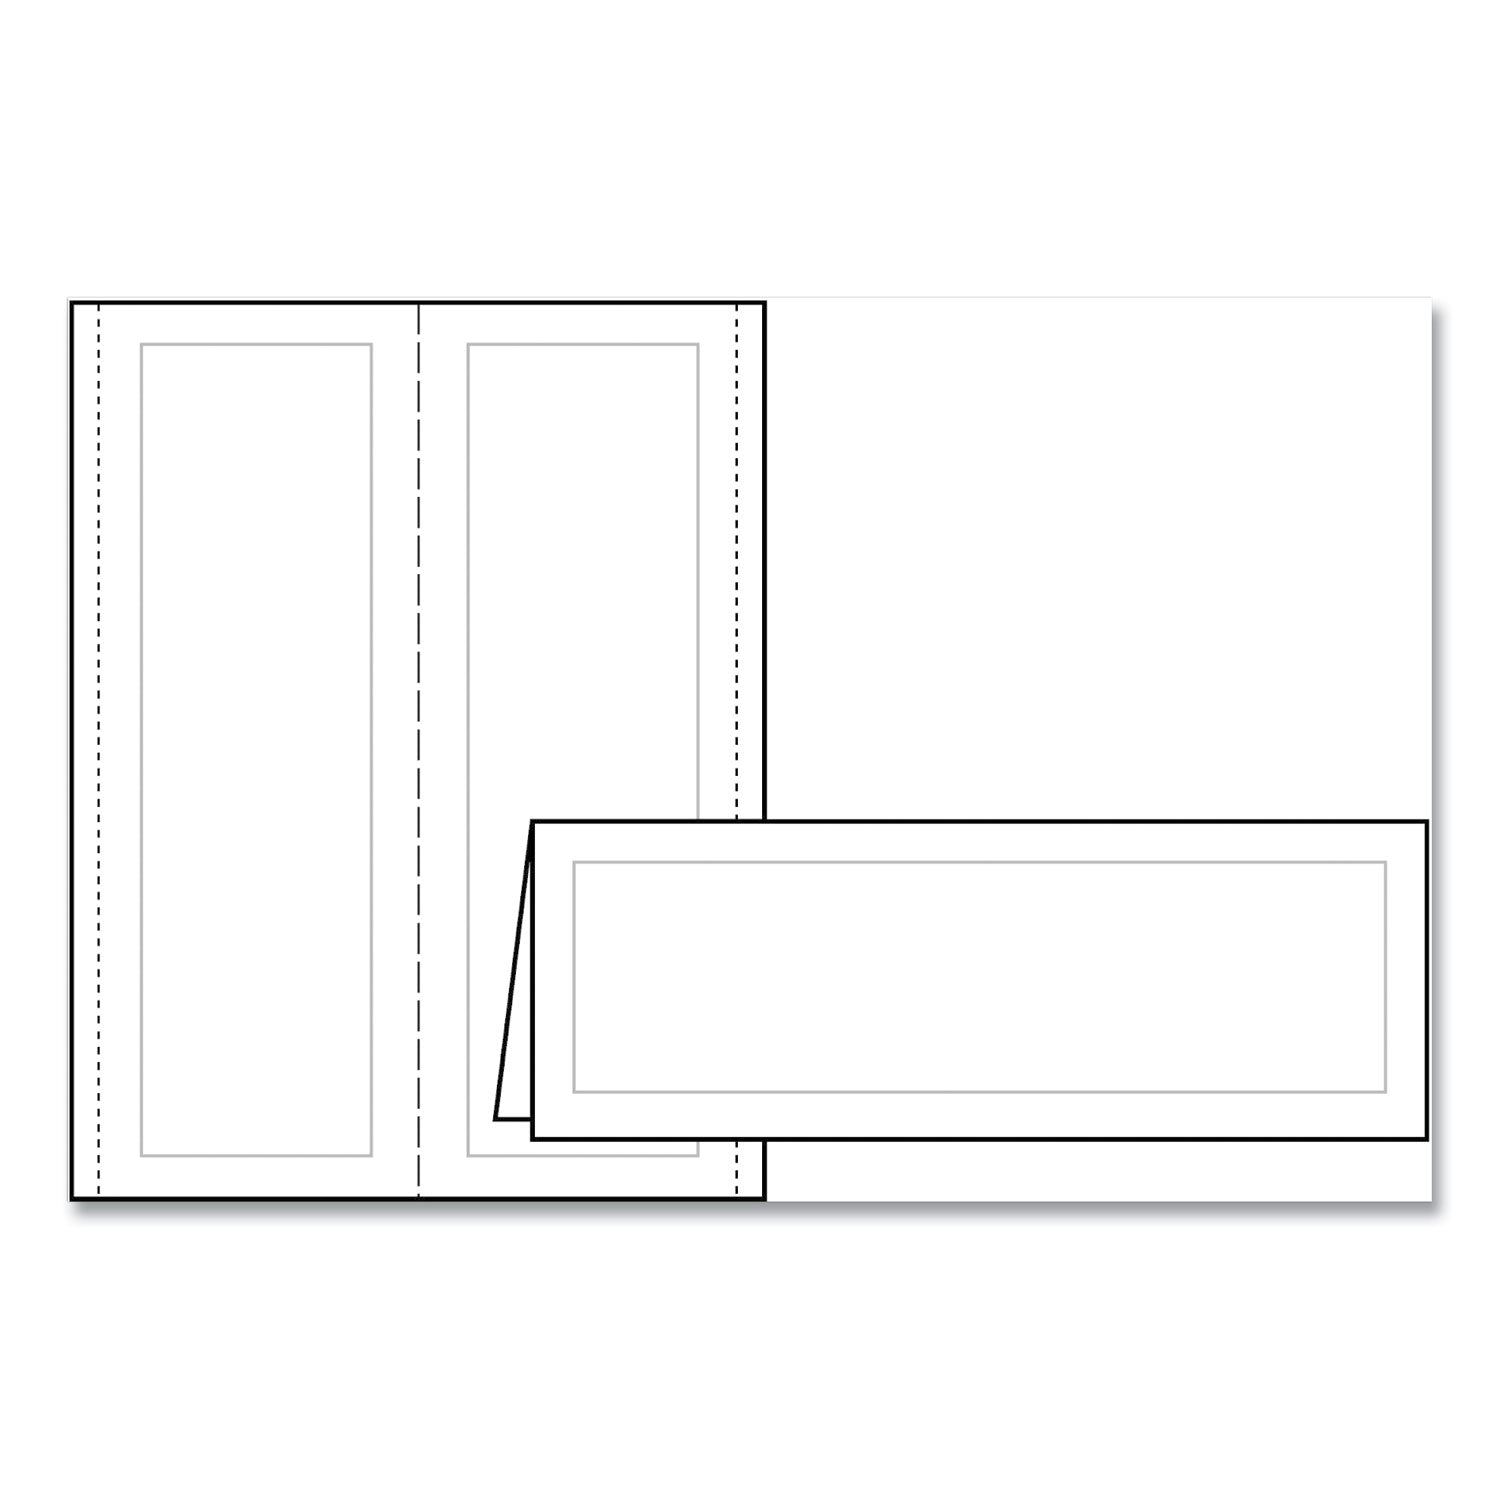 large-embossed-tent-card-ivory-35-x-11-1-card-sheet-50-sheets-pack_ave5915 - 6